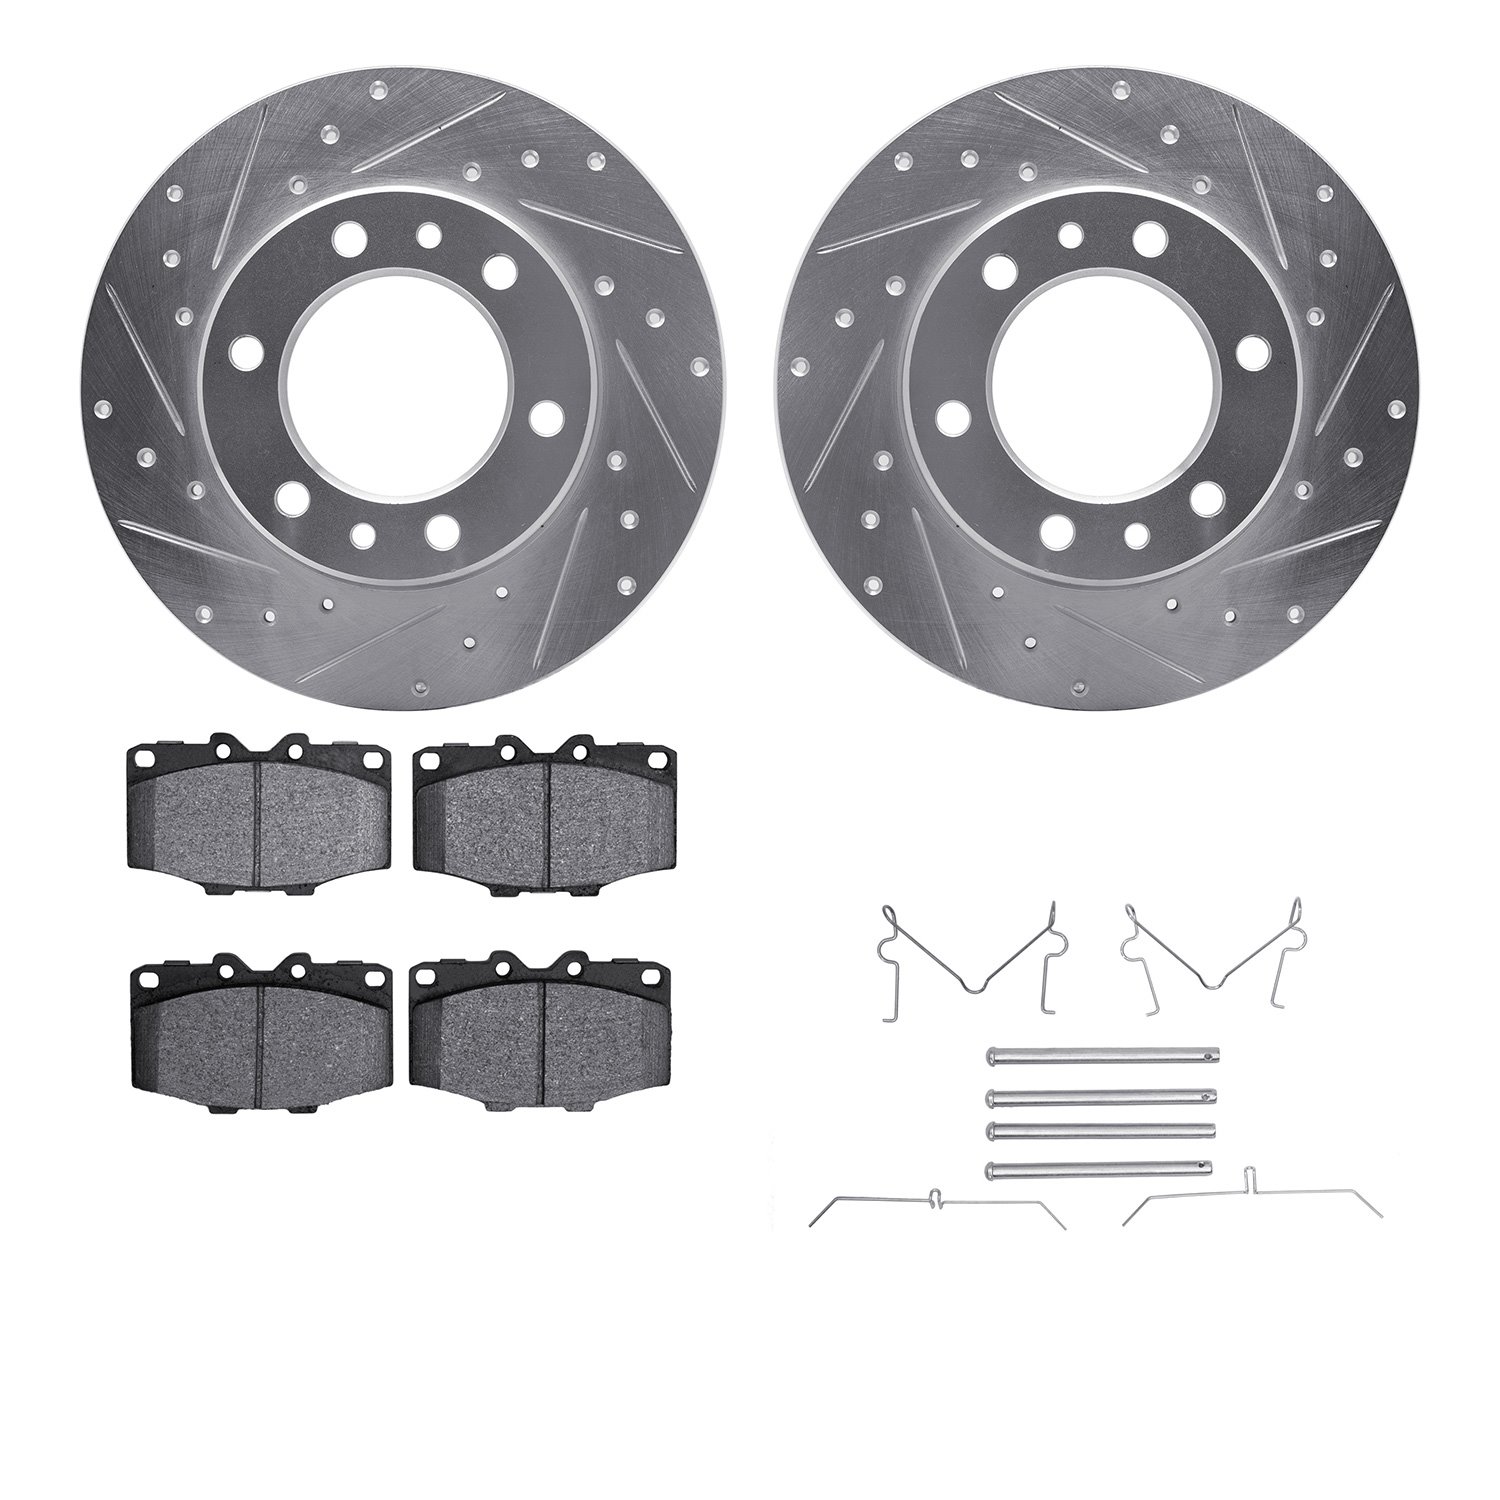 7412-76003 Drilled/Slotted Brake Rotors with Ultimate-Duty Brake Pads Kit & Hardware [Silver], 1981-1985 Lexus/Toyota/Scion, Pos